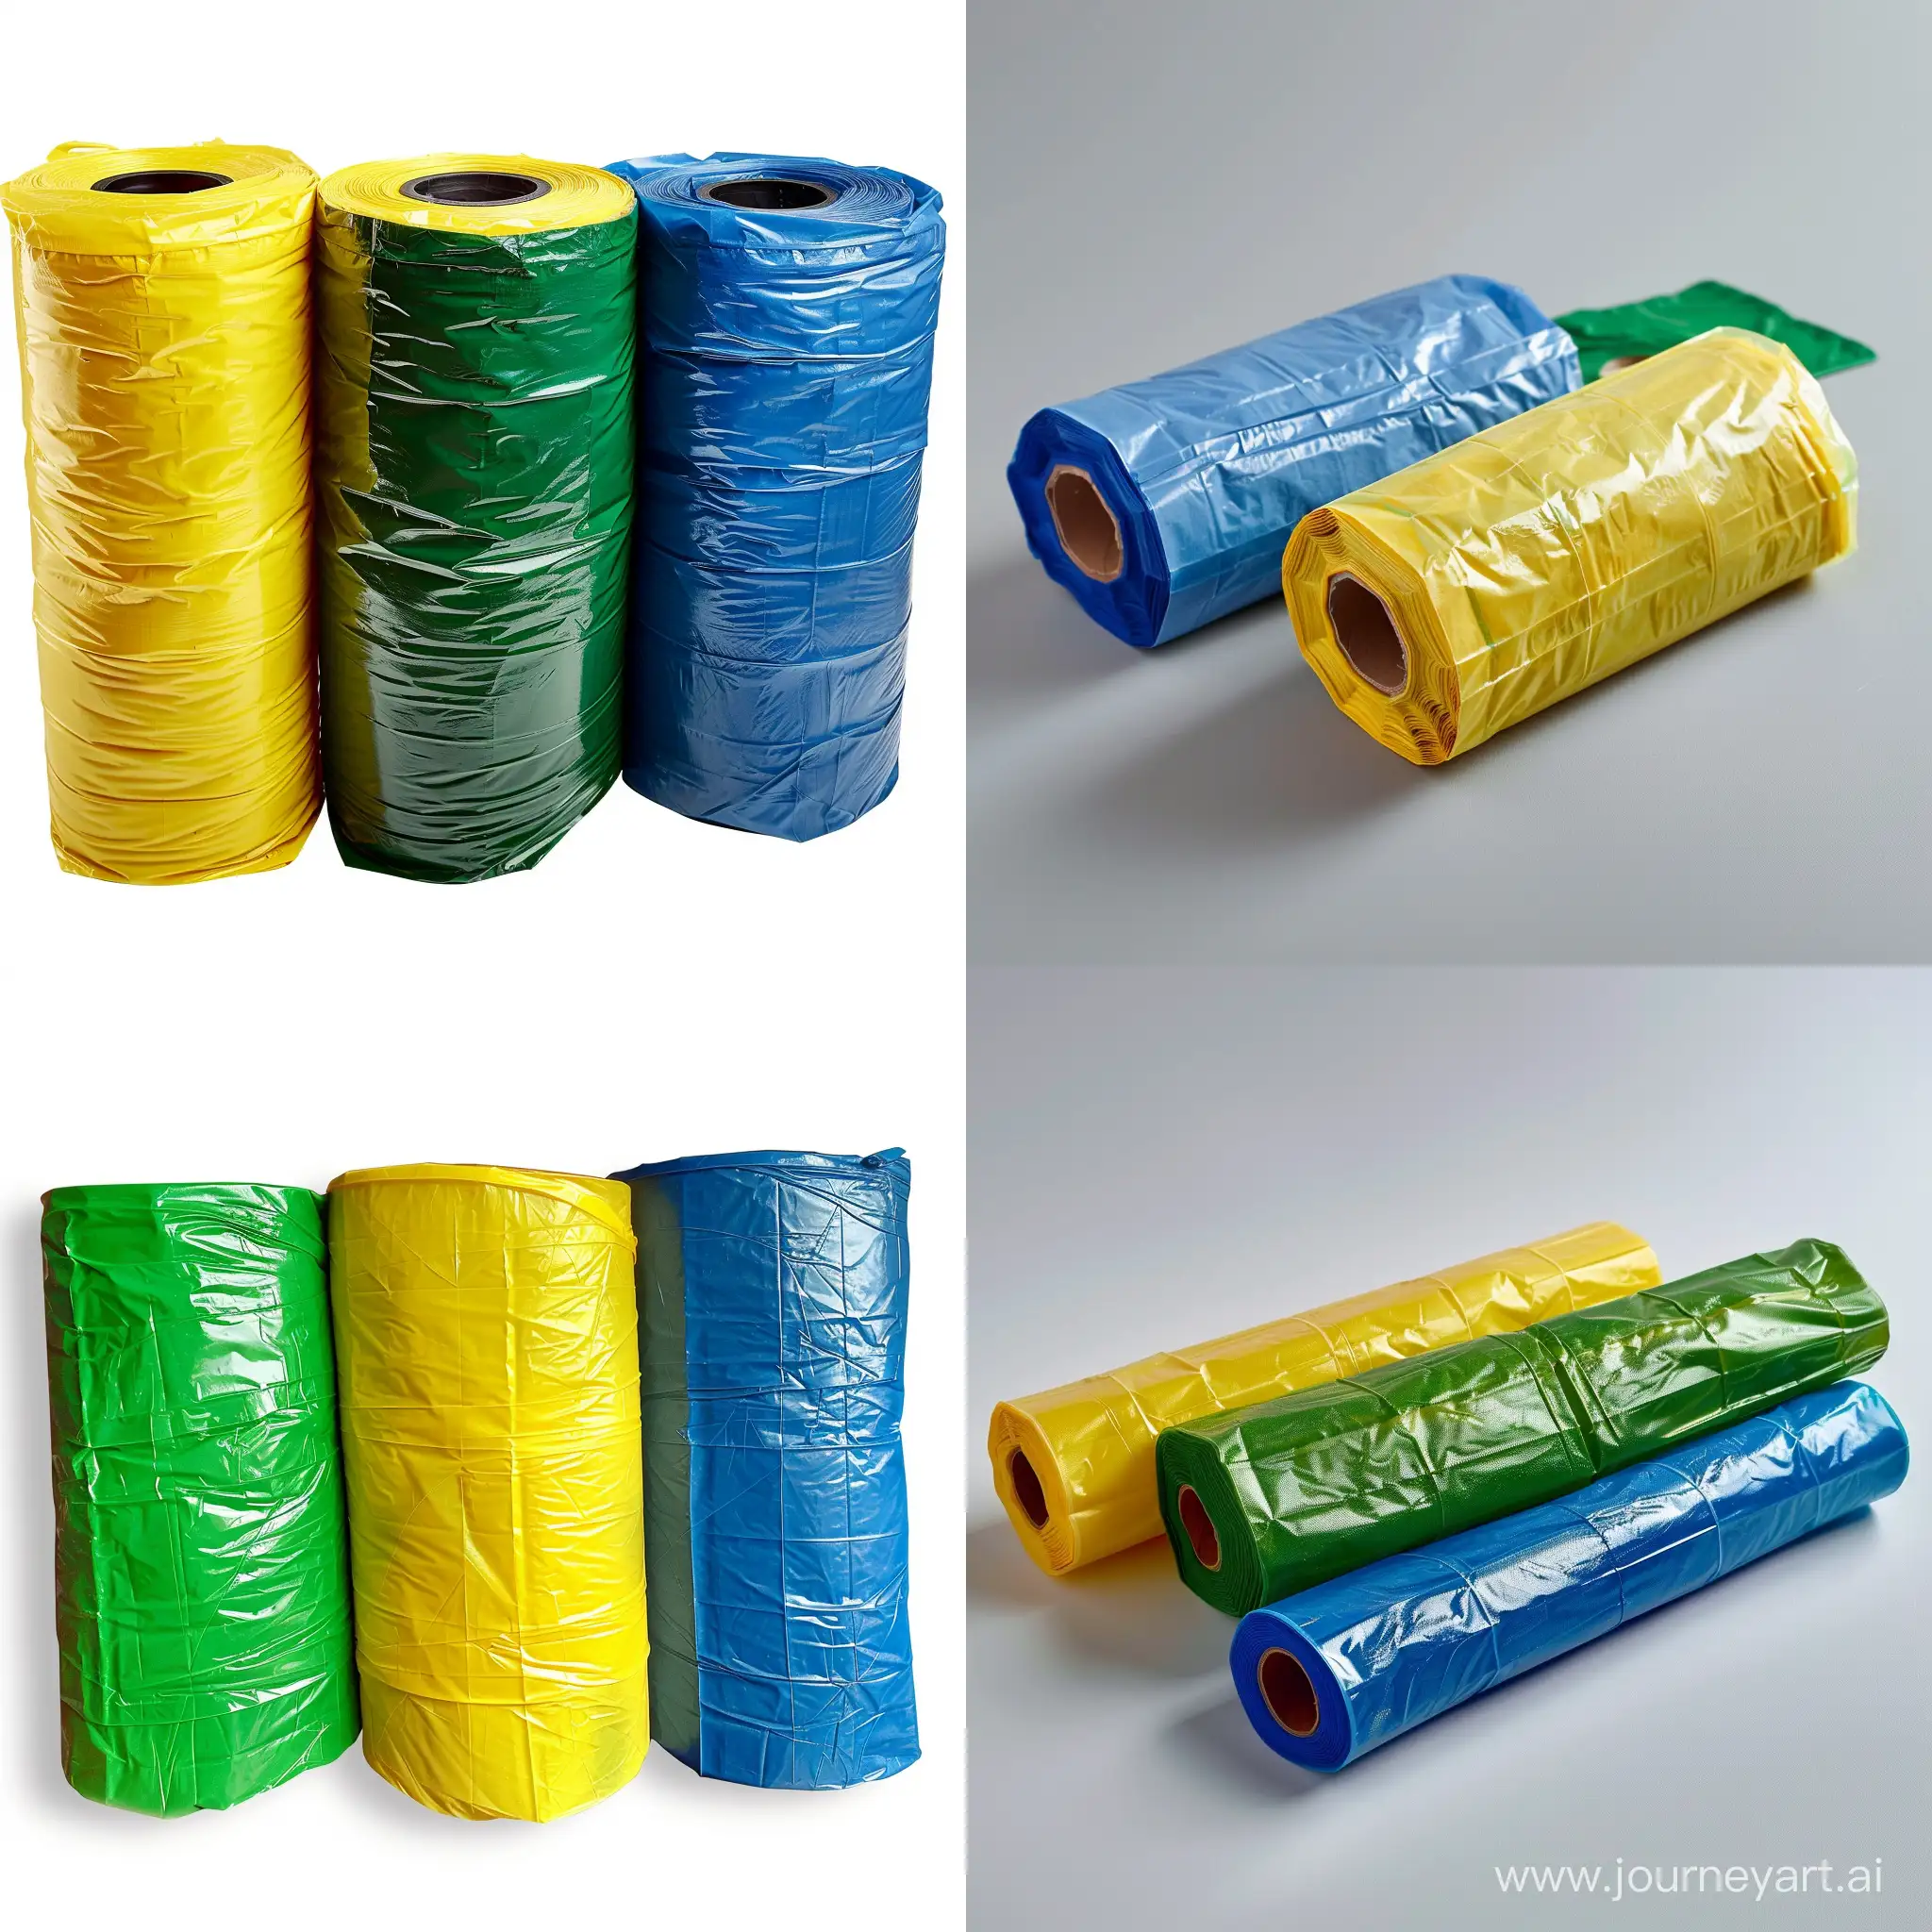 Colorful-Trio-of-Garbage-Bags-Yellow-Green-and-Blue